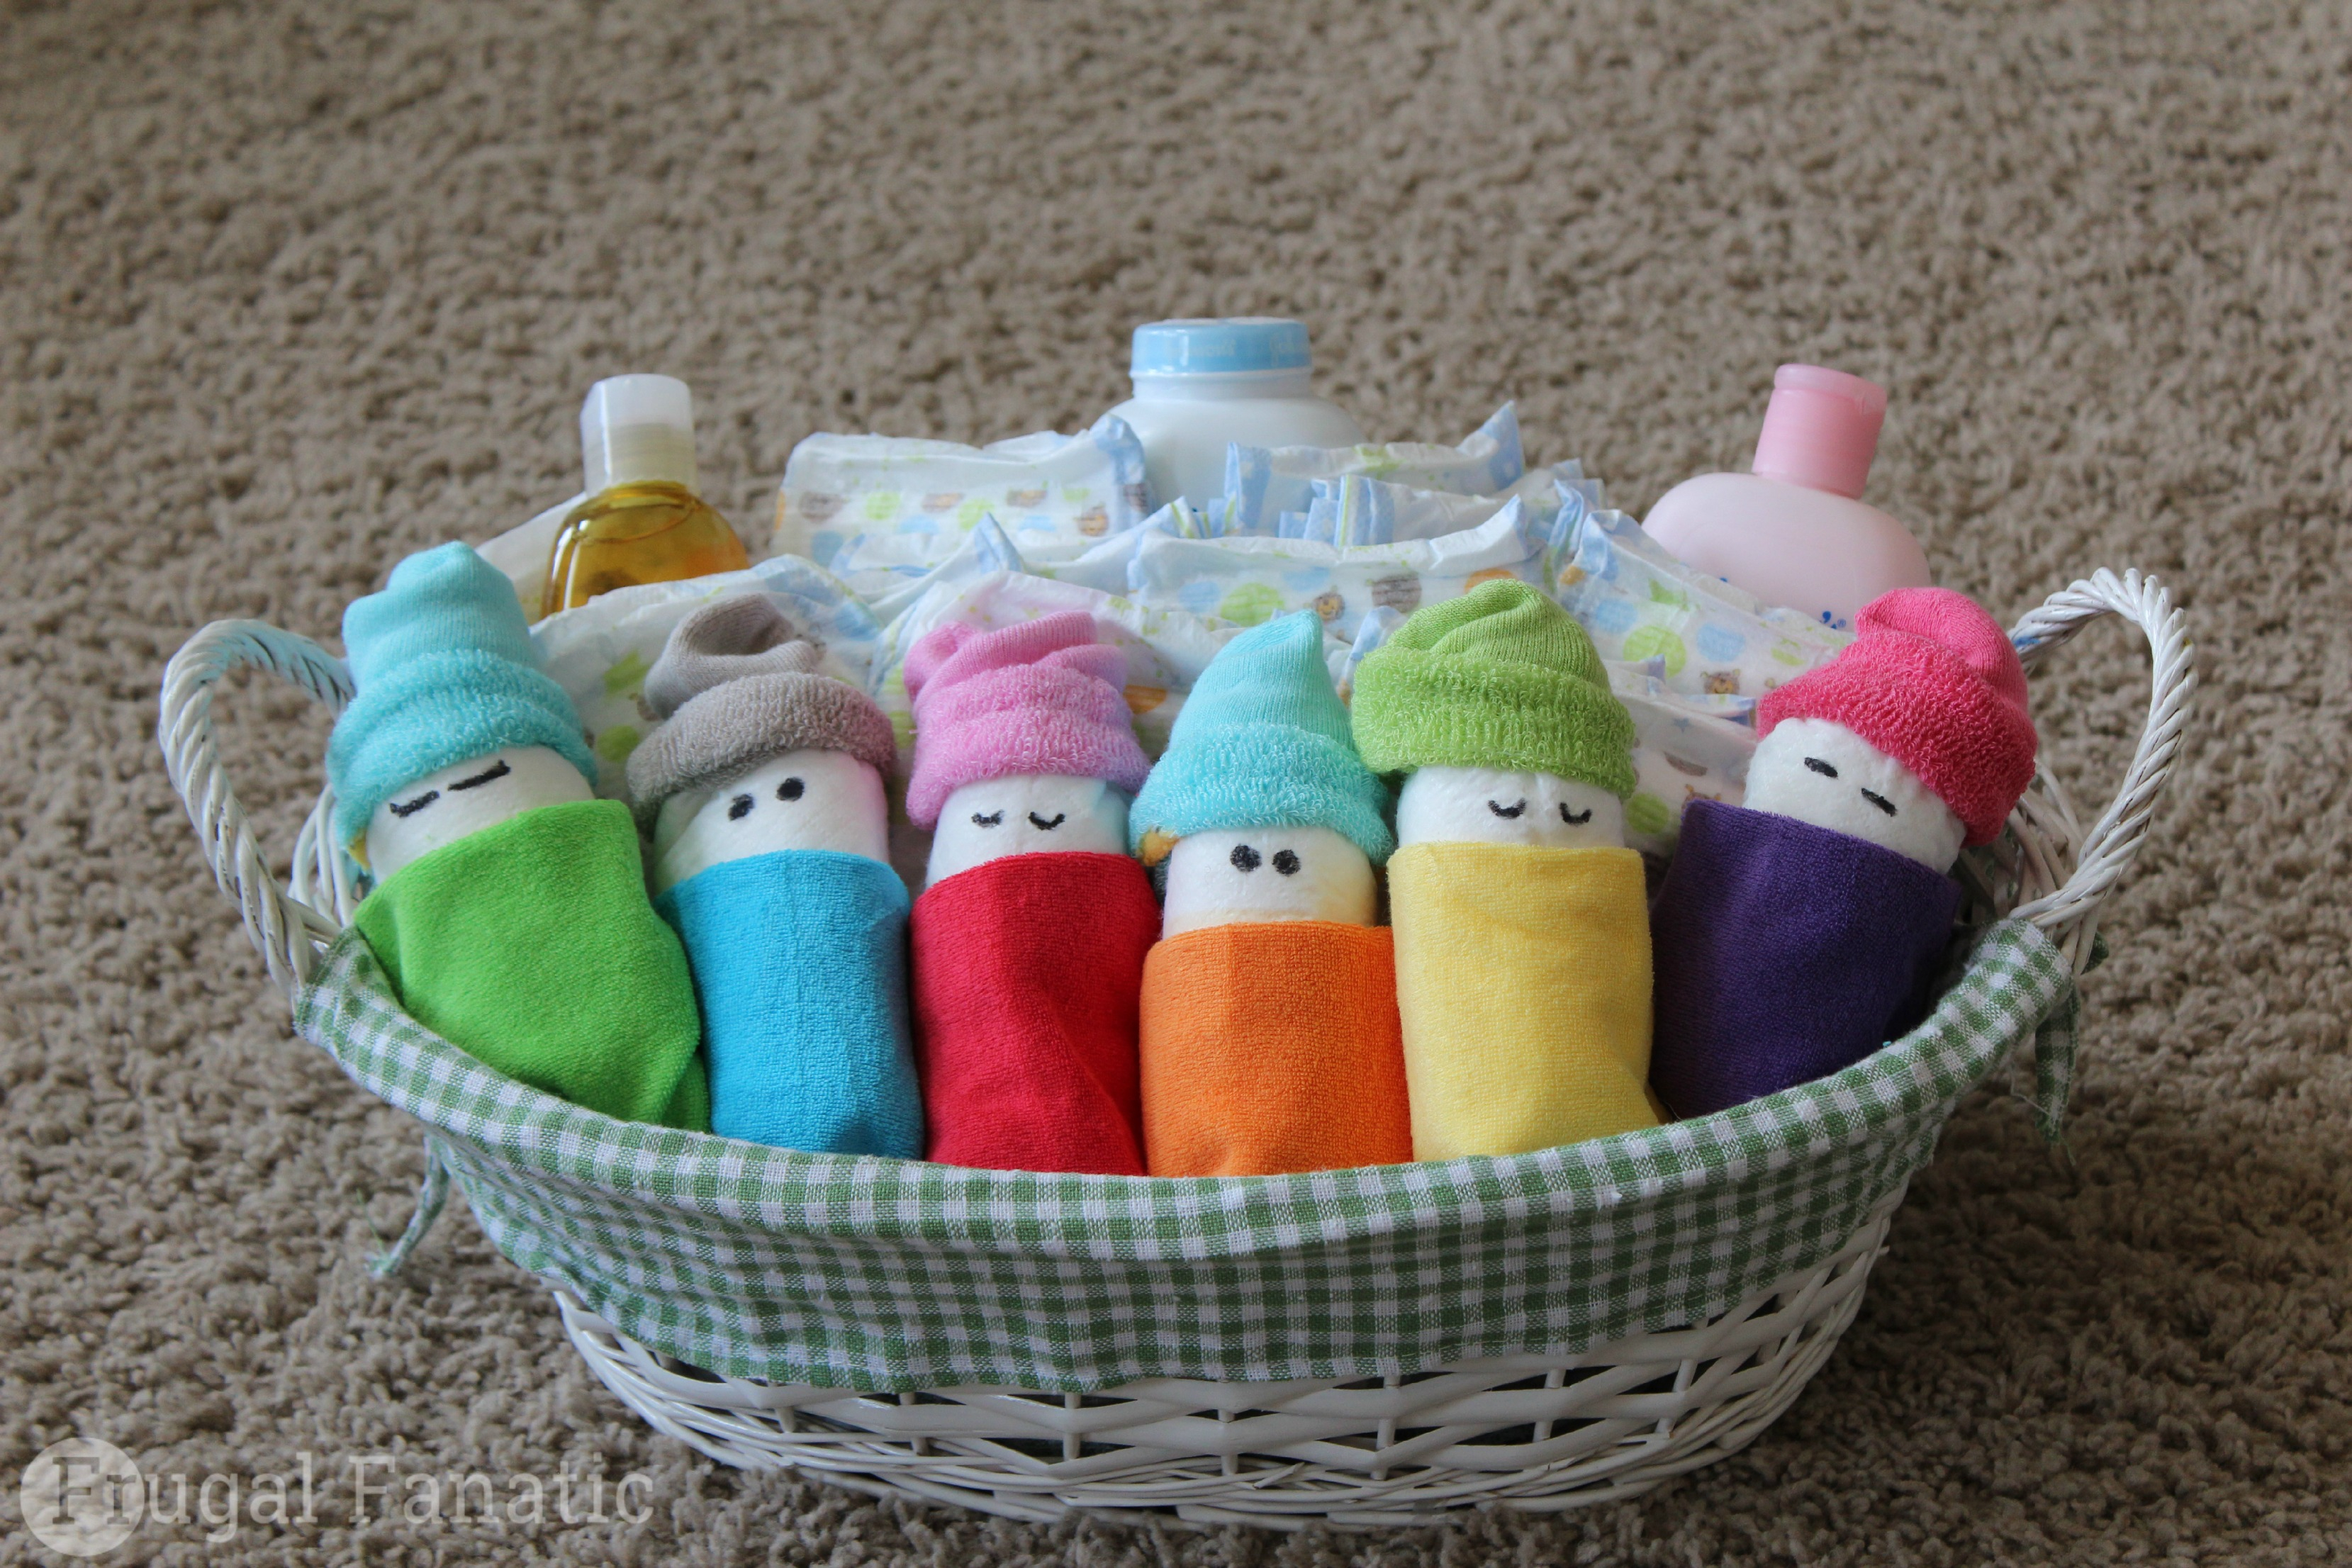 10 Most Recommended Baby Gift Ideas To Make how to make diaper babies easy baby shower gift idea frugal fanatic 9 2024